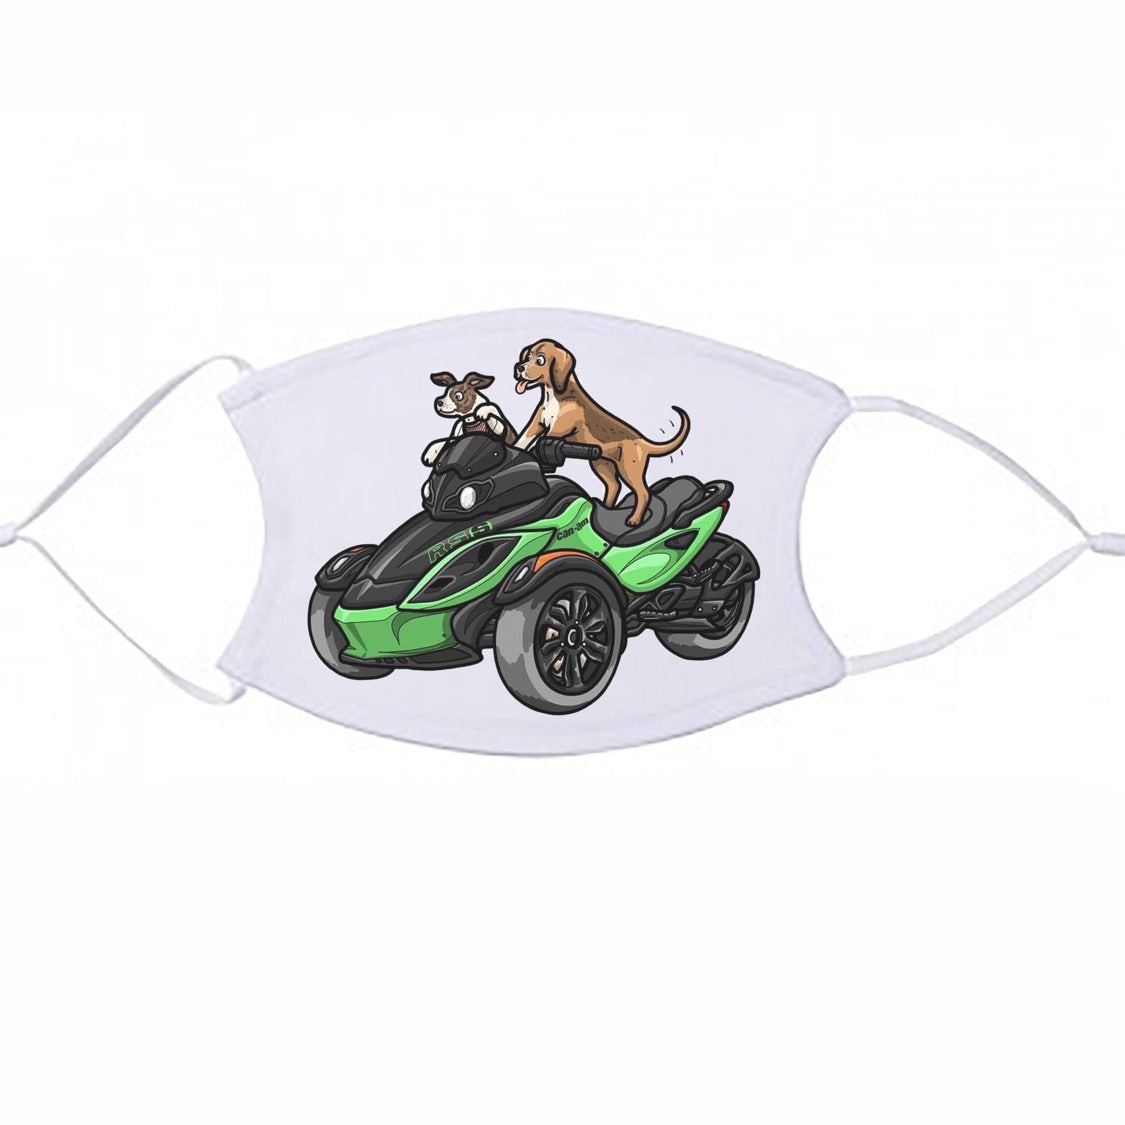 On Sale $8.00 In Stock  Fabric Facial Shields with Pocket for Filter - Smarty Pants Boutique NH